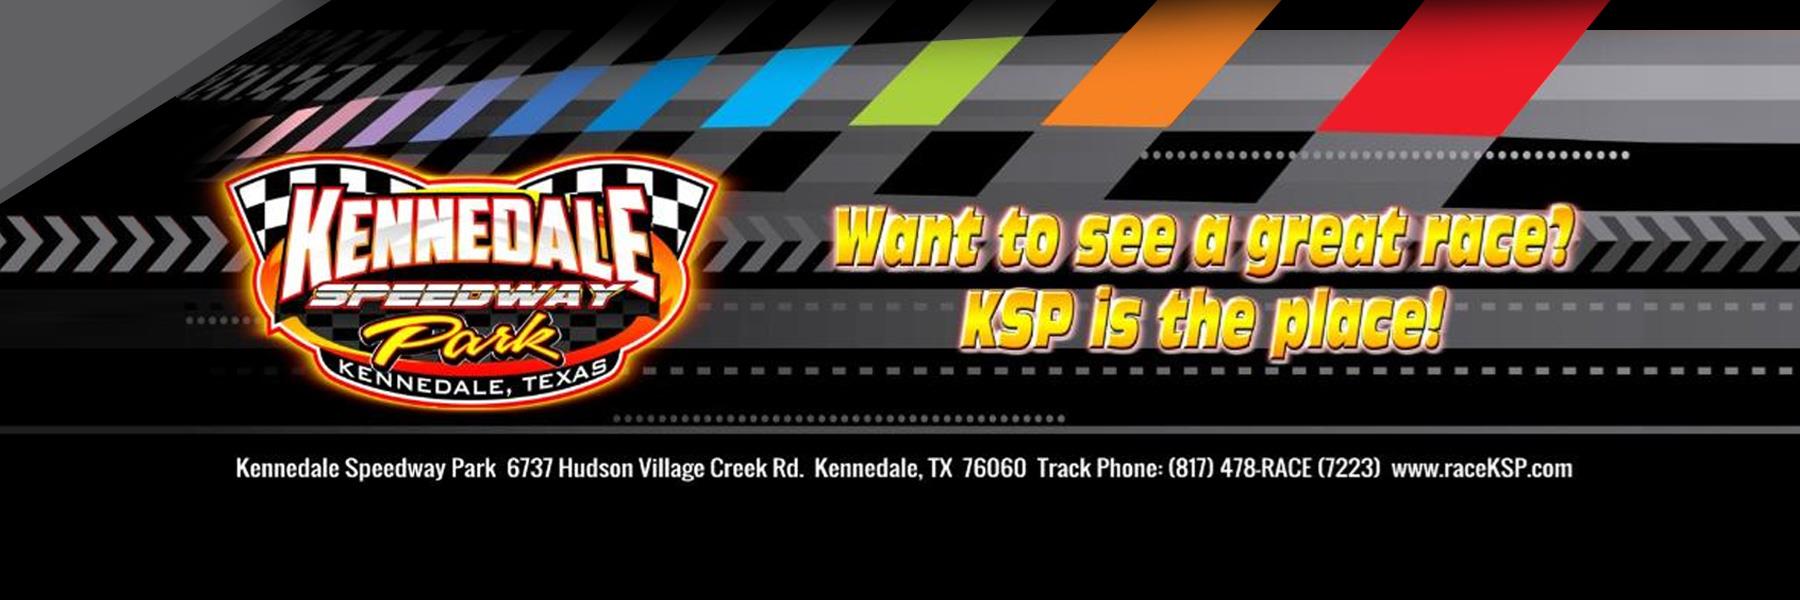 9/10/2021 - Kennedale Speedway Park